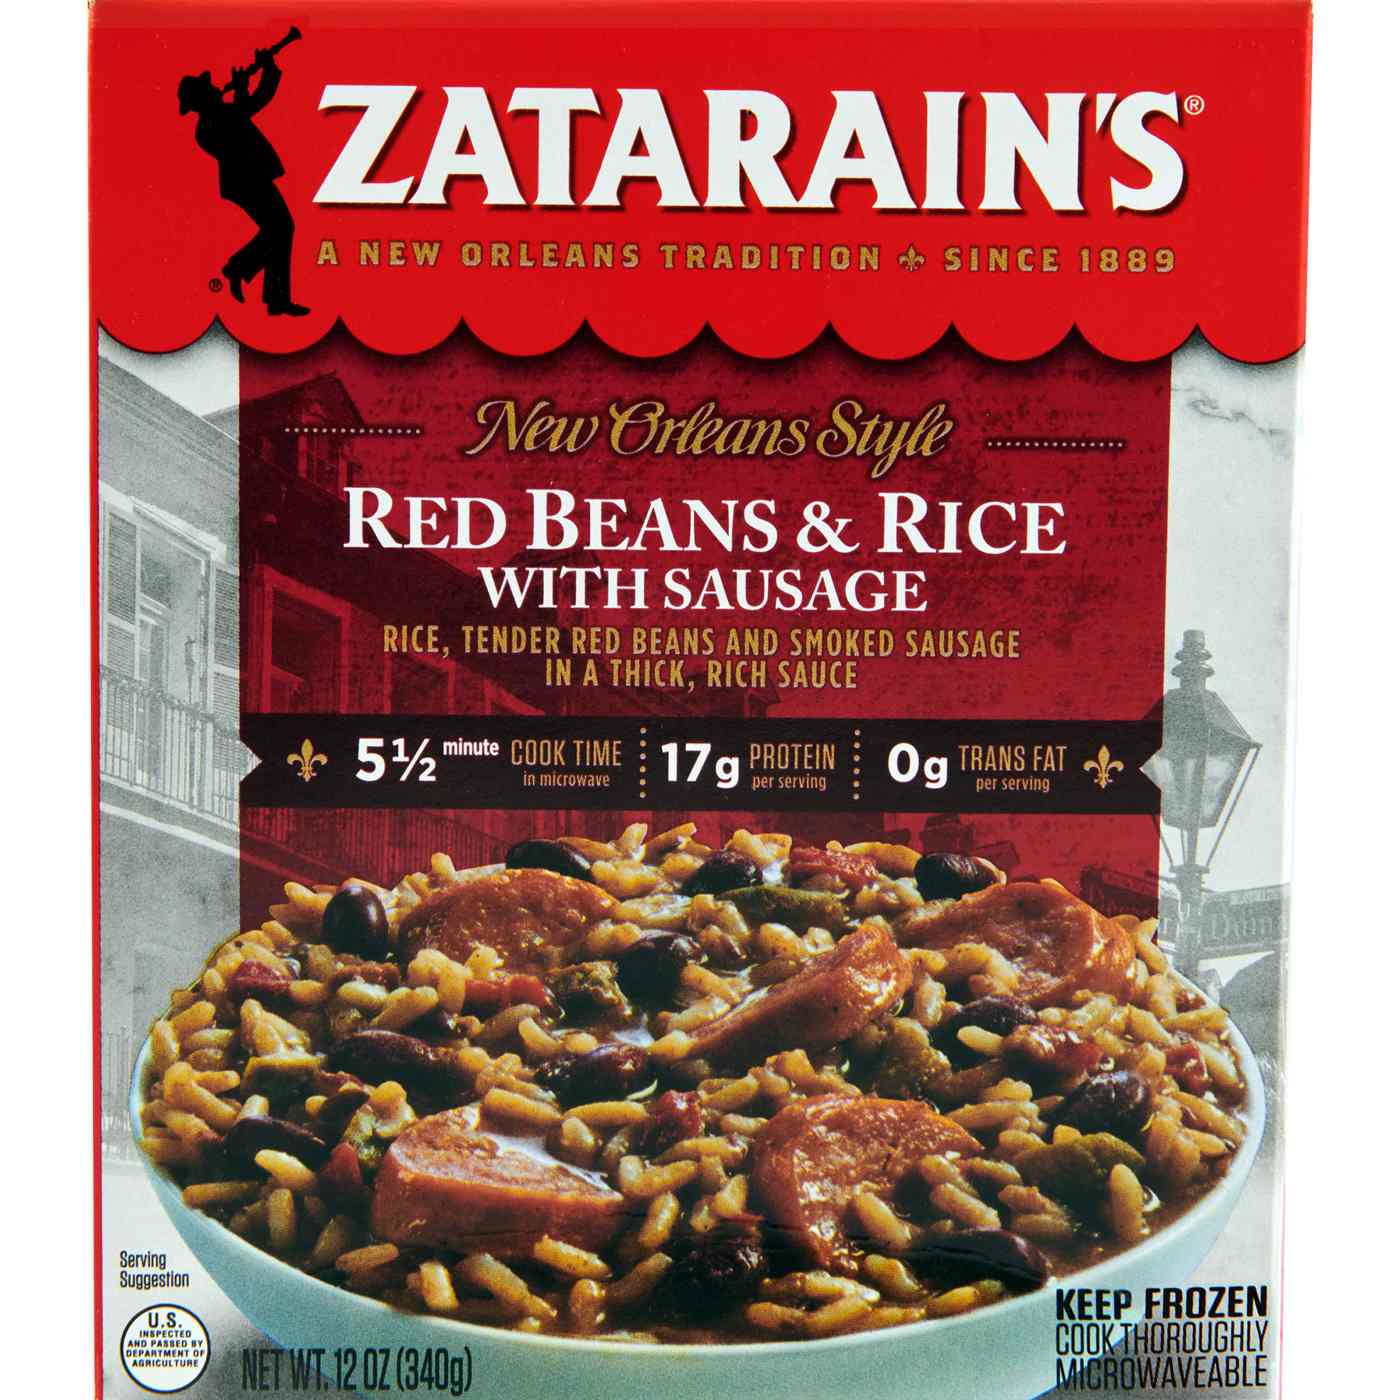 How to Make Zatarain's Red Beans and Rice * Cook and Review 